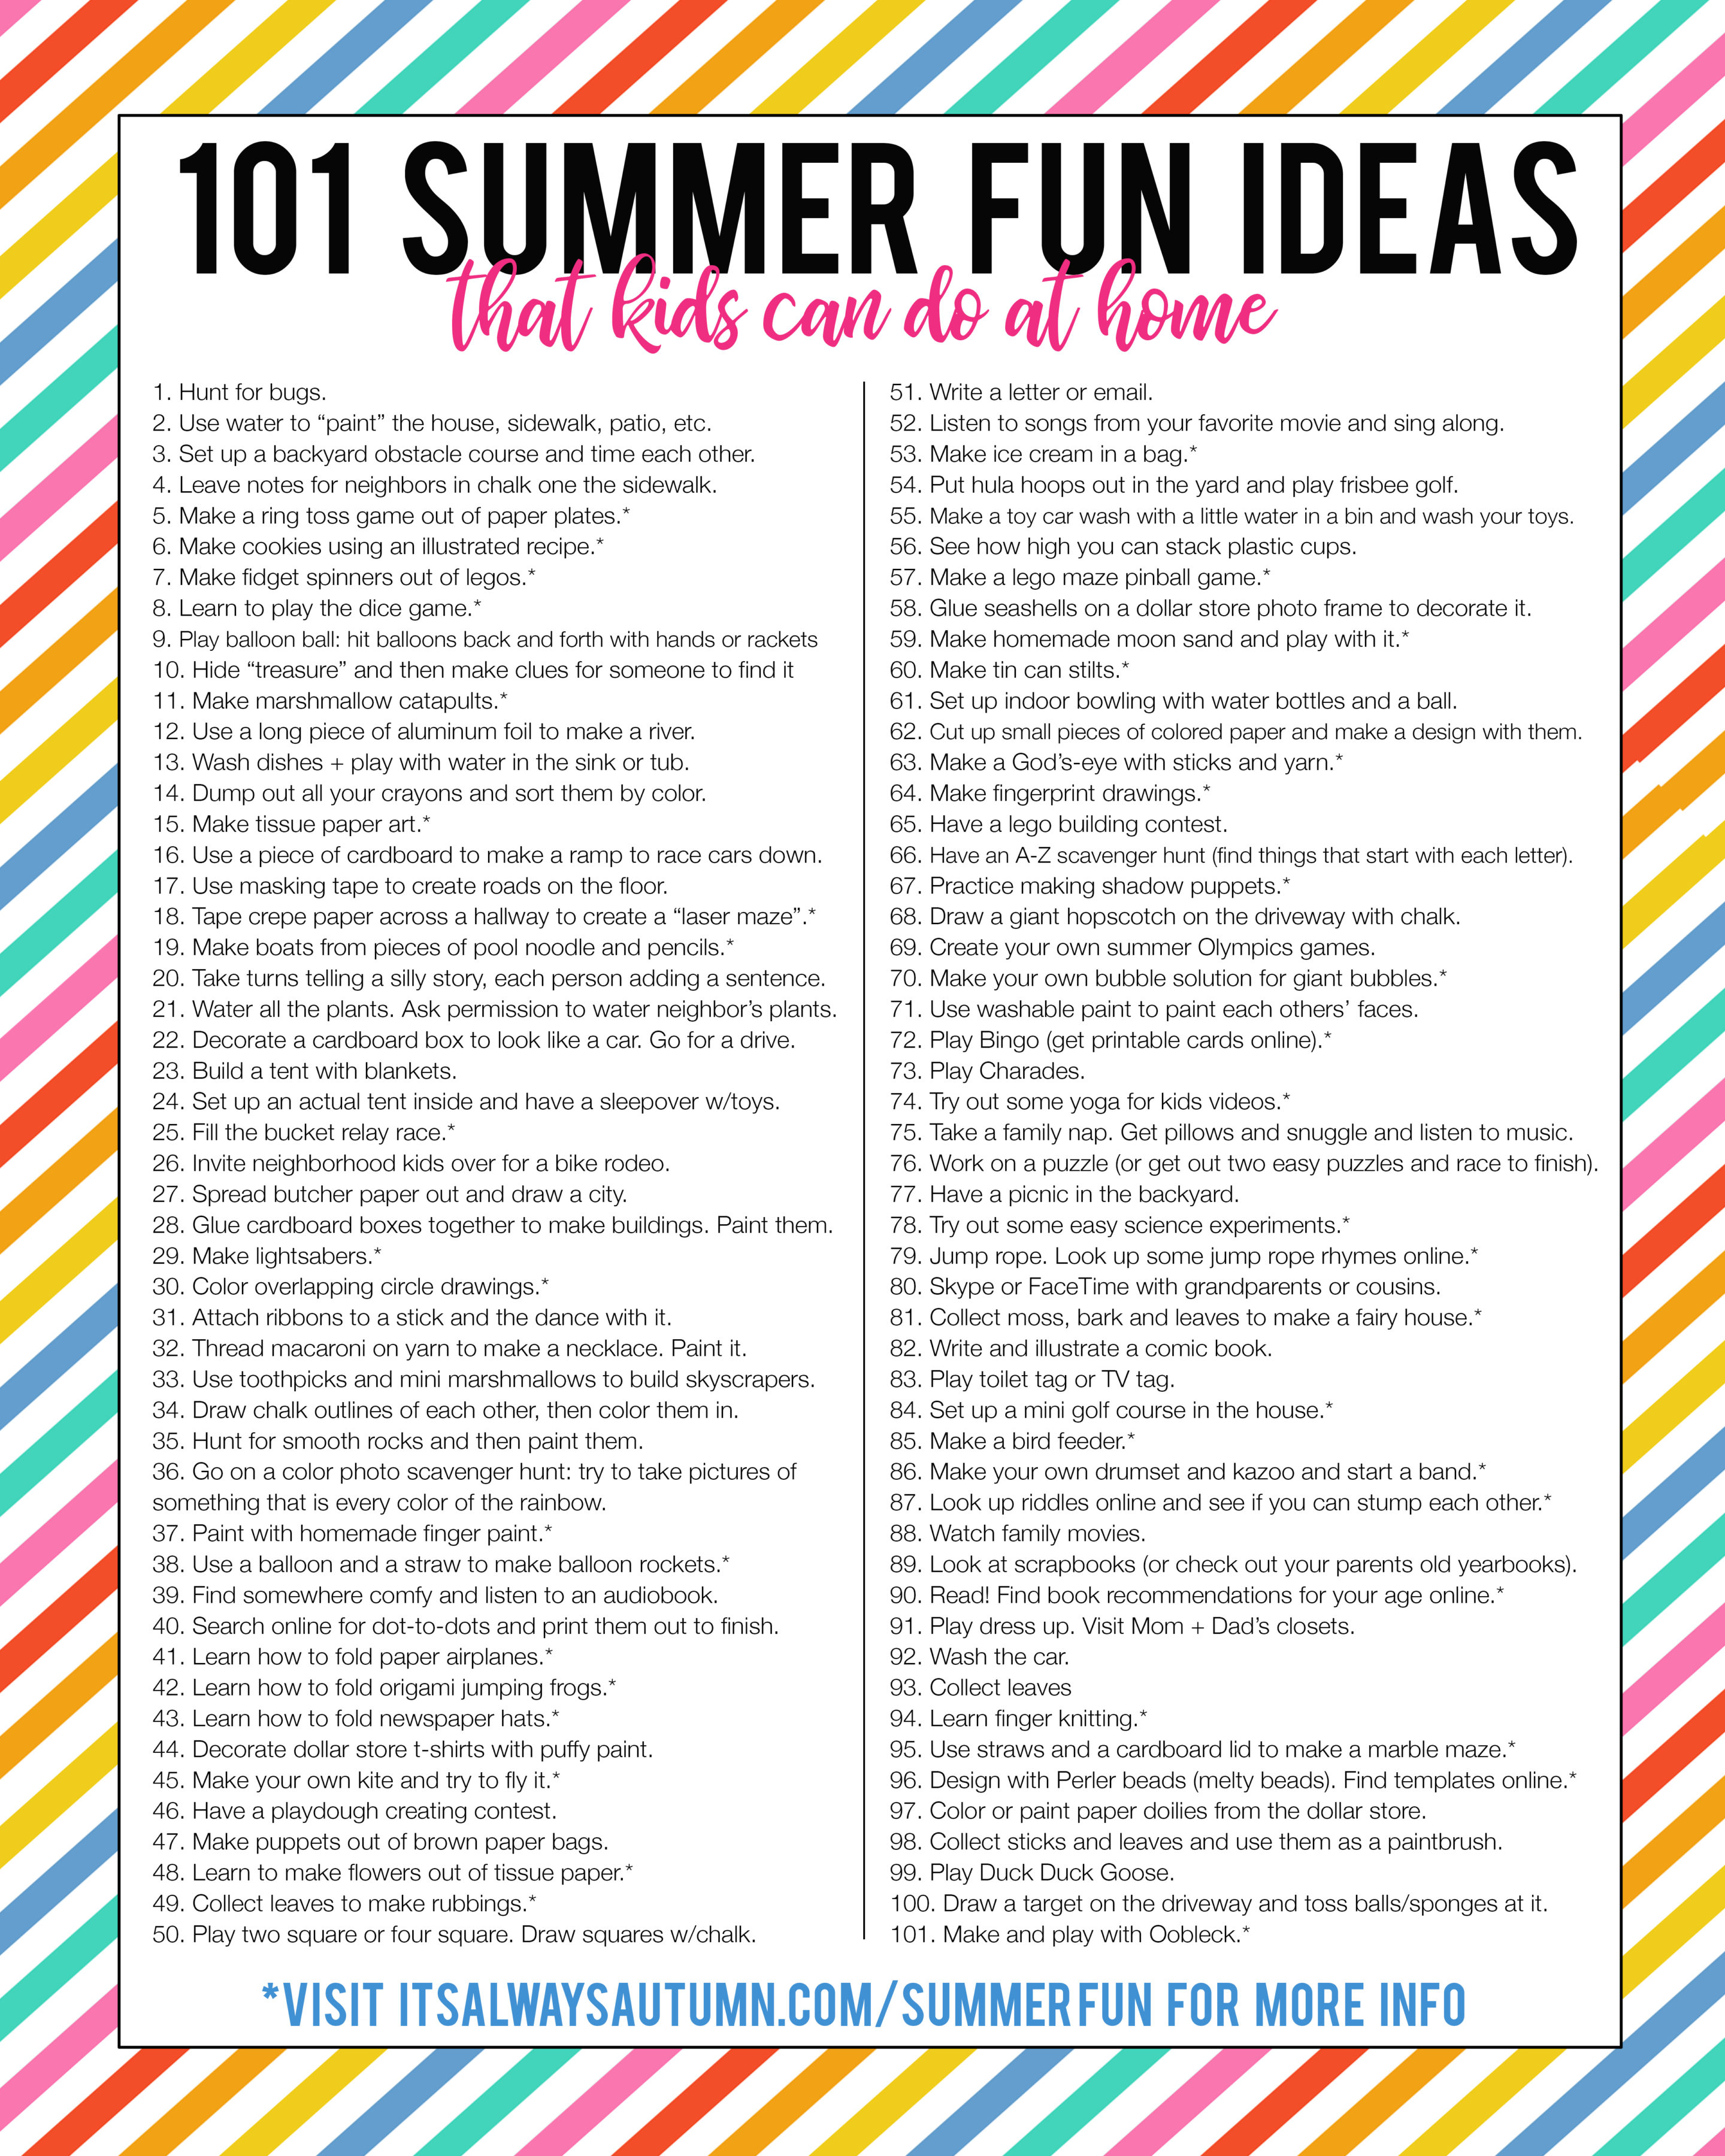 101 summer activities for kids that can be done at home! Games, crafts, and more.